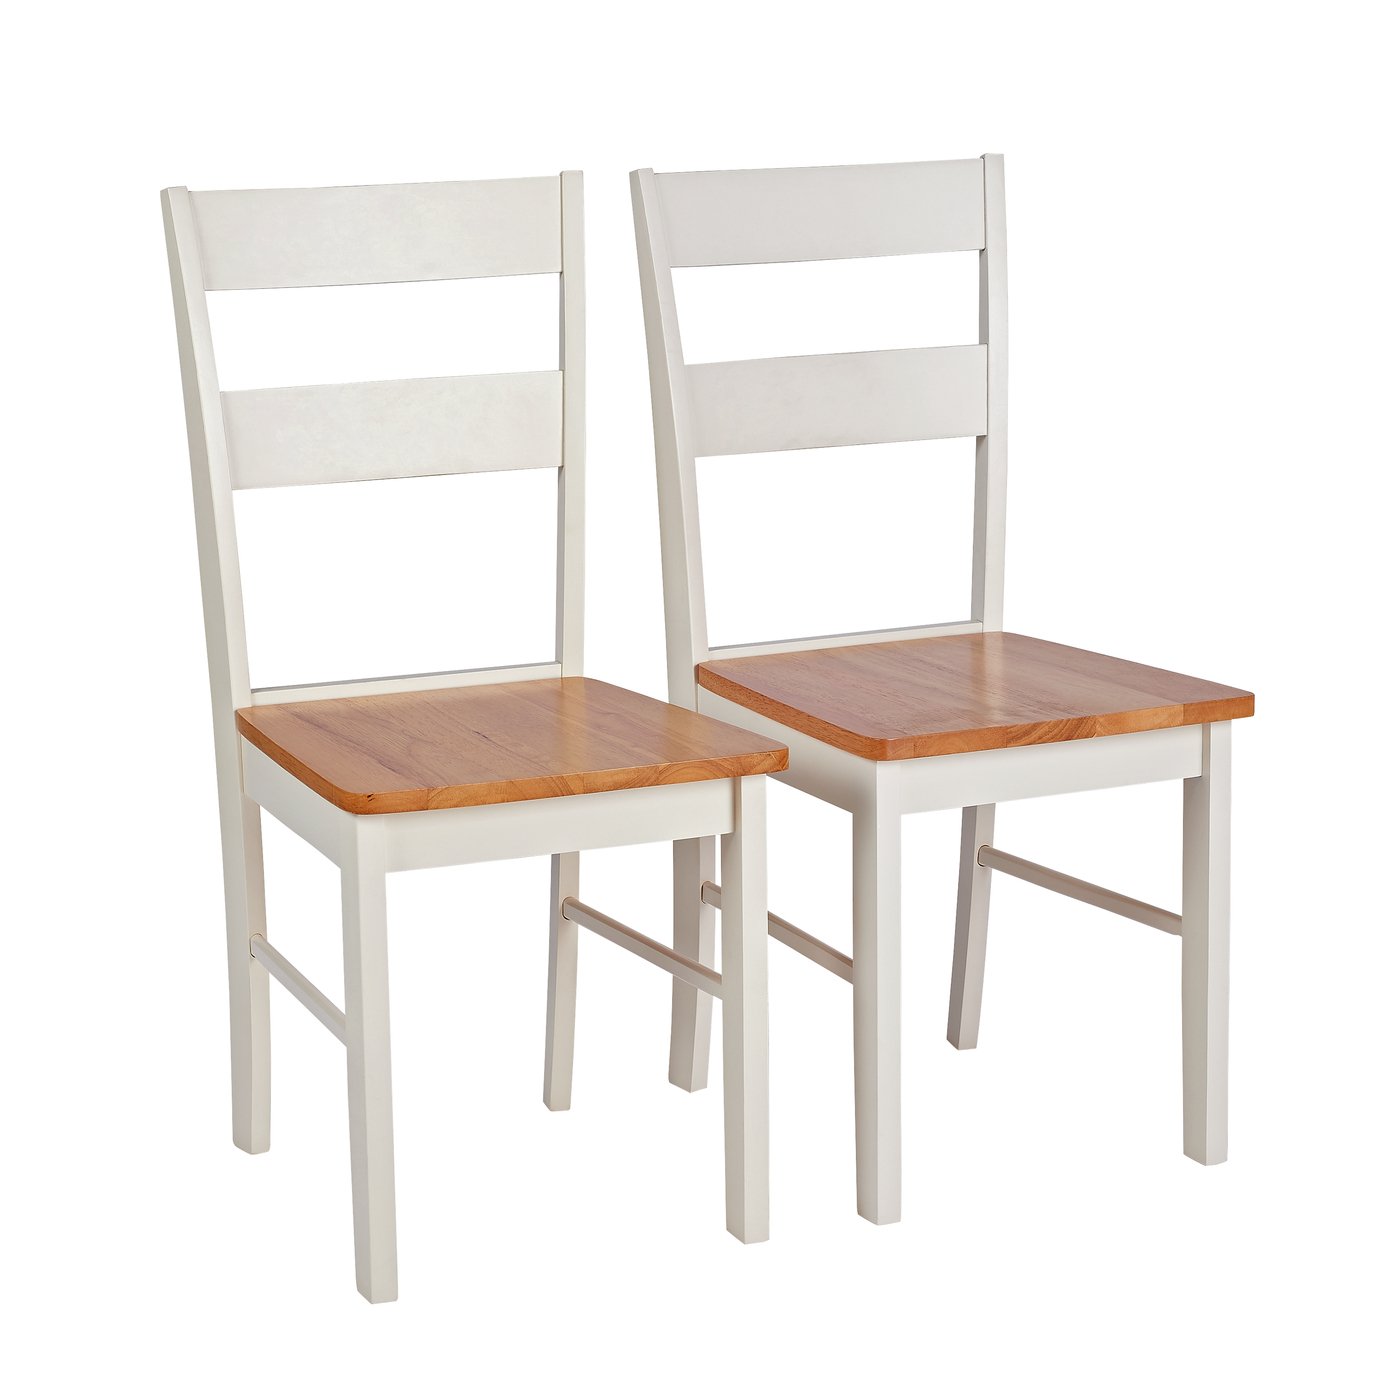 Dining chairs | Page 2 | Argos Price Tracker | pricehistory.co.uk